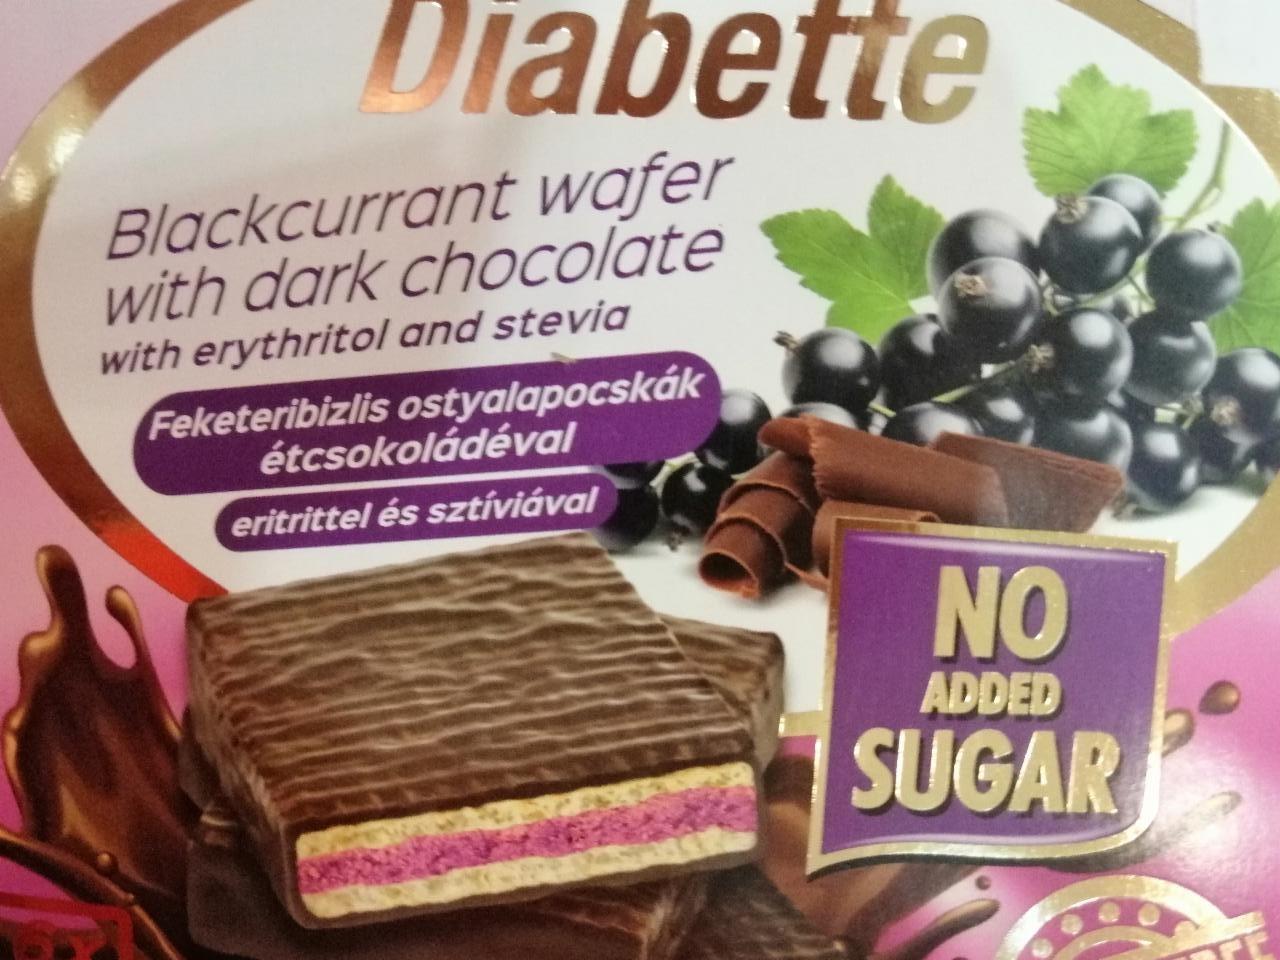 Fotografie - Blackcurrant wafer with dark chocolate with erythirol and stevia Dibette